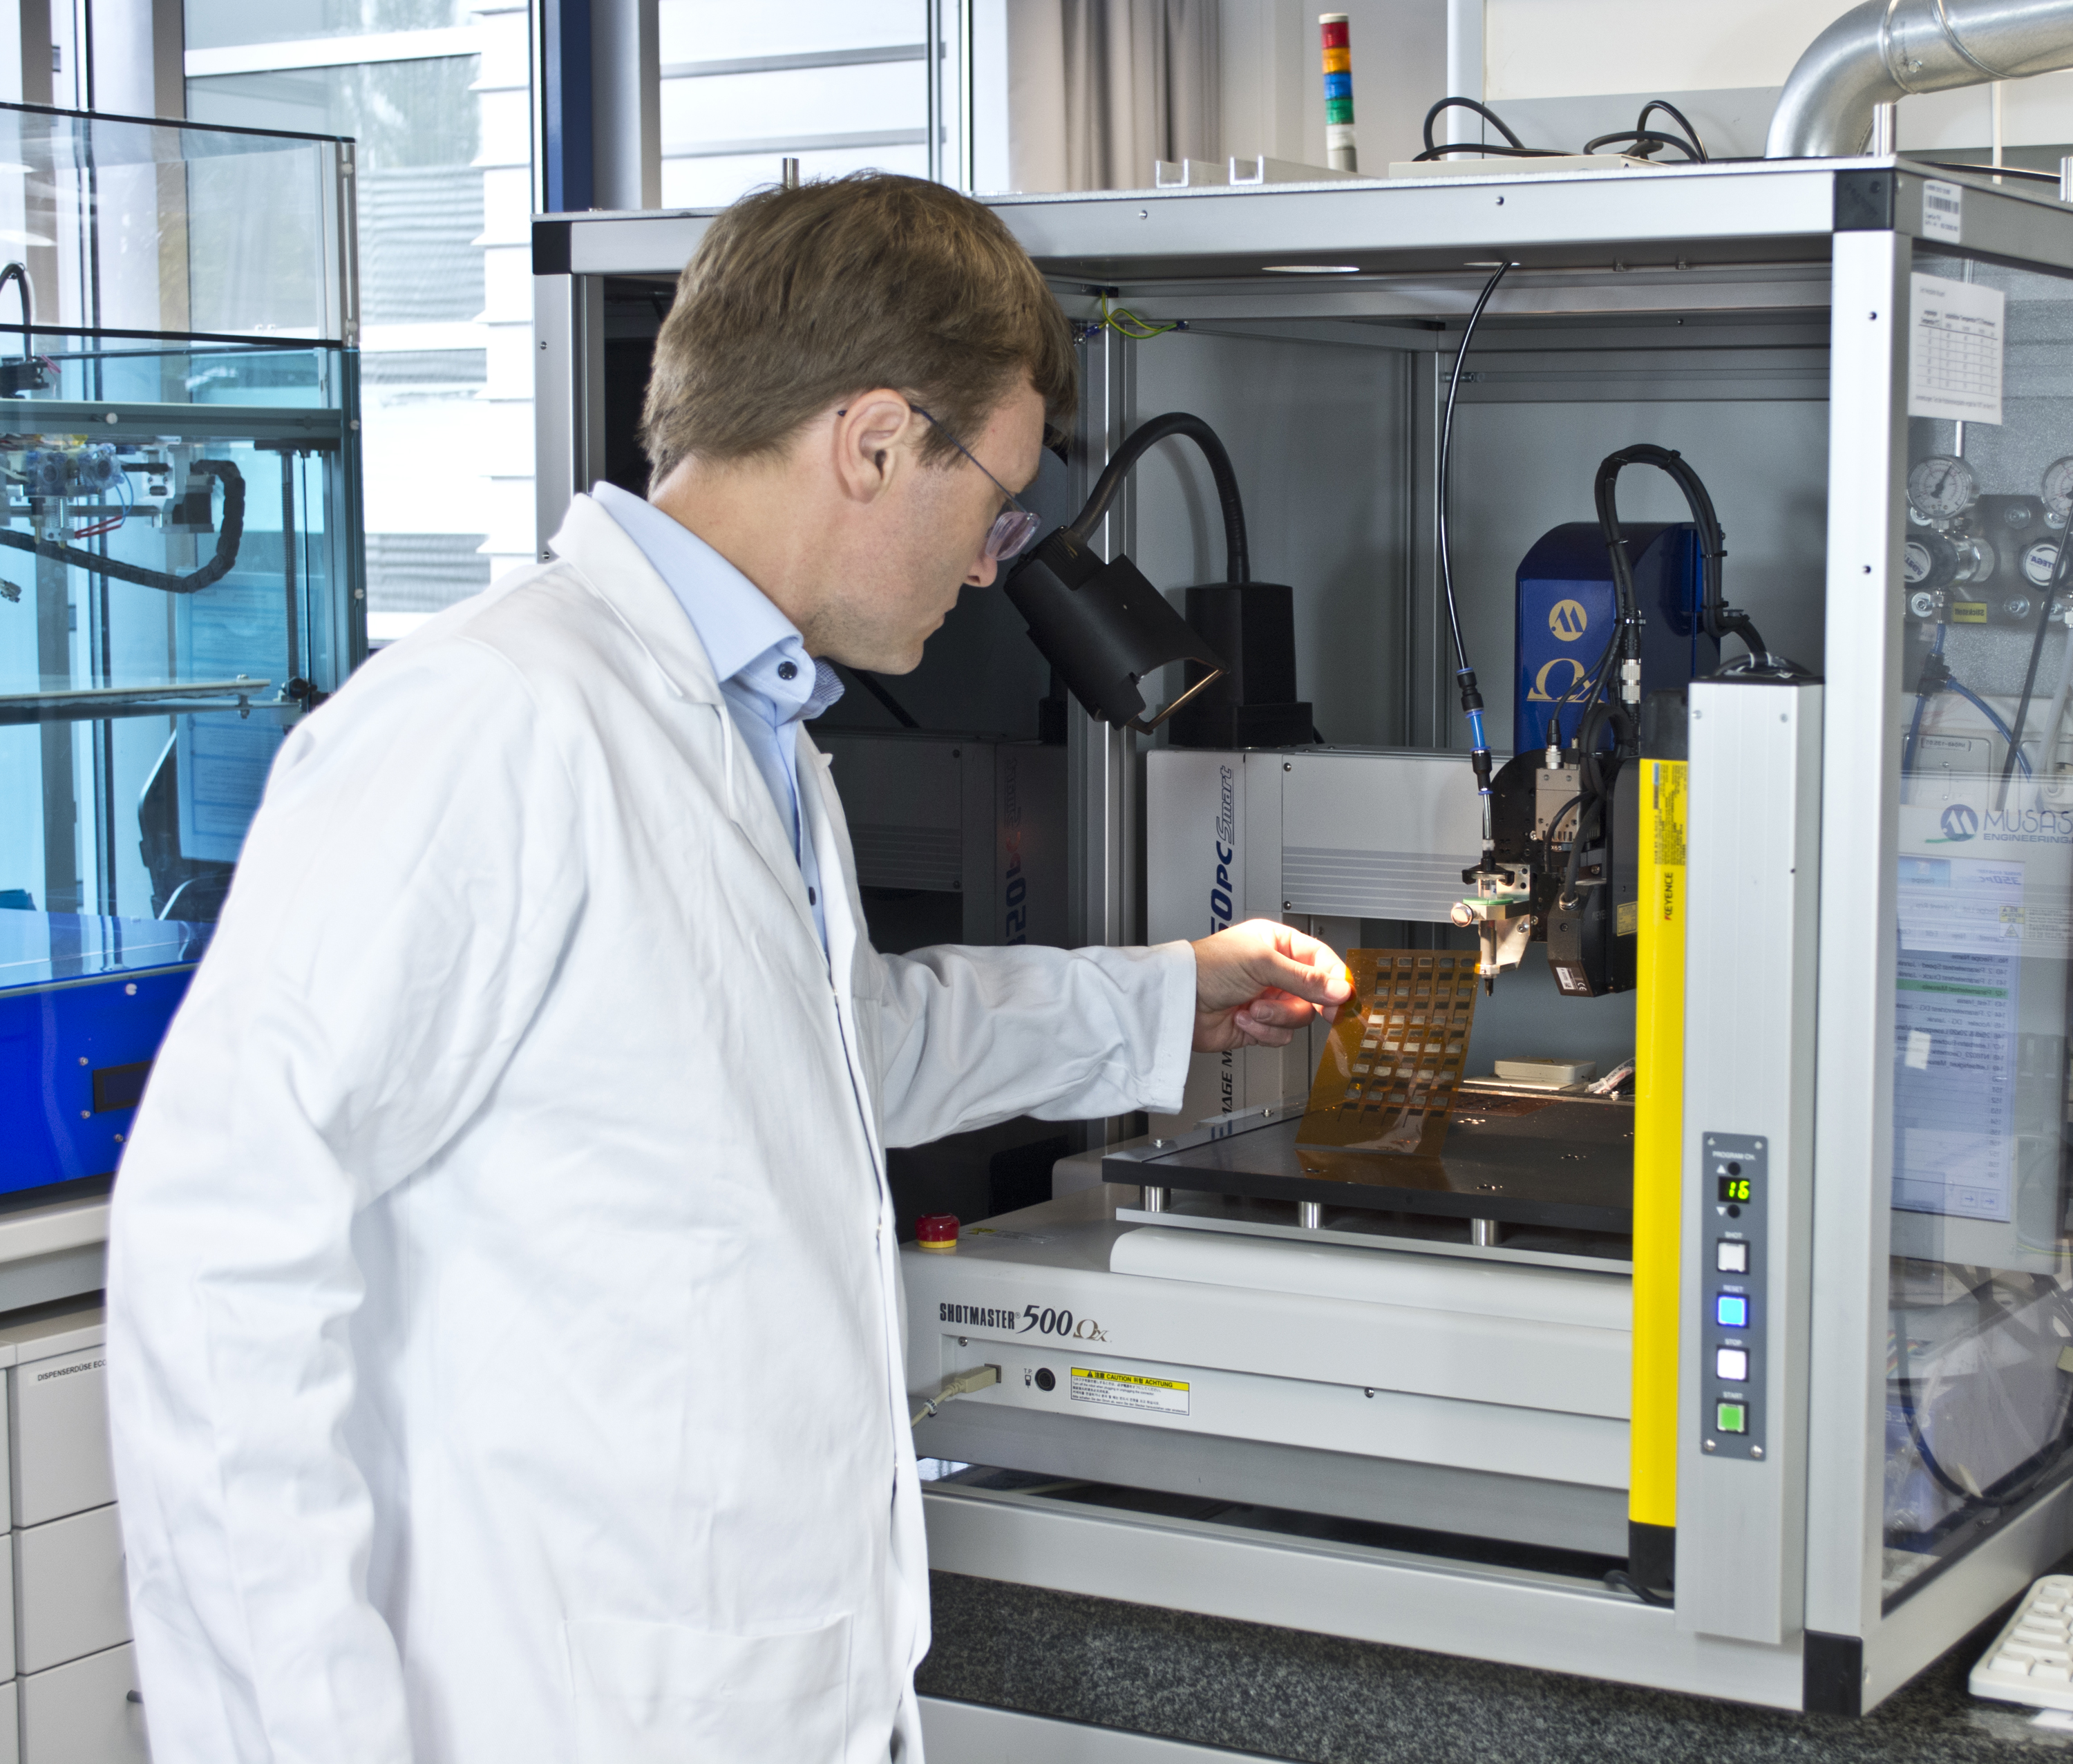 Dr. Roman Tkachov examines a film printed with two different conductive polymers at a dispensing printer in the Fraunhofer IWS Dresden. "PEDOT:PSS" is a polymer with positive charge carriers (“p-conductive”), while “Poly(Kx[Ni-itto])” transports negative charge carriers (“n-conductive”). This also shows that IWS polymers can be processed using standard techniques such as printers or rotary coating.